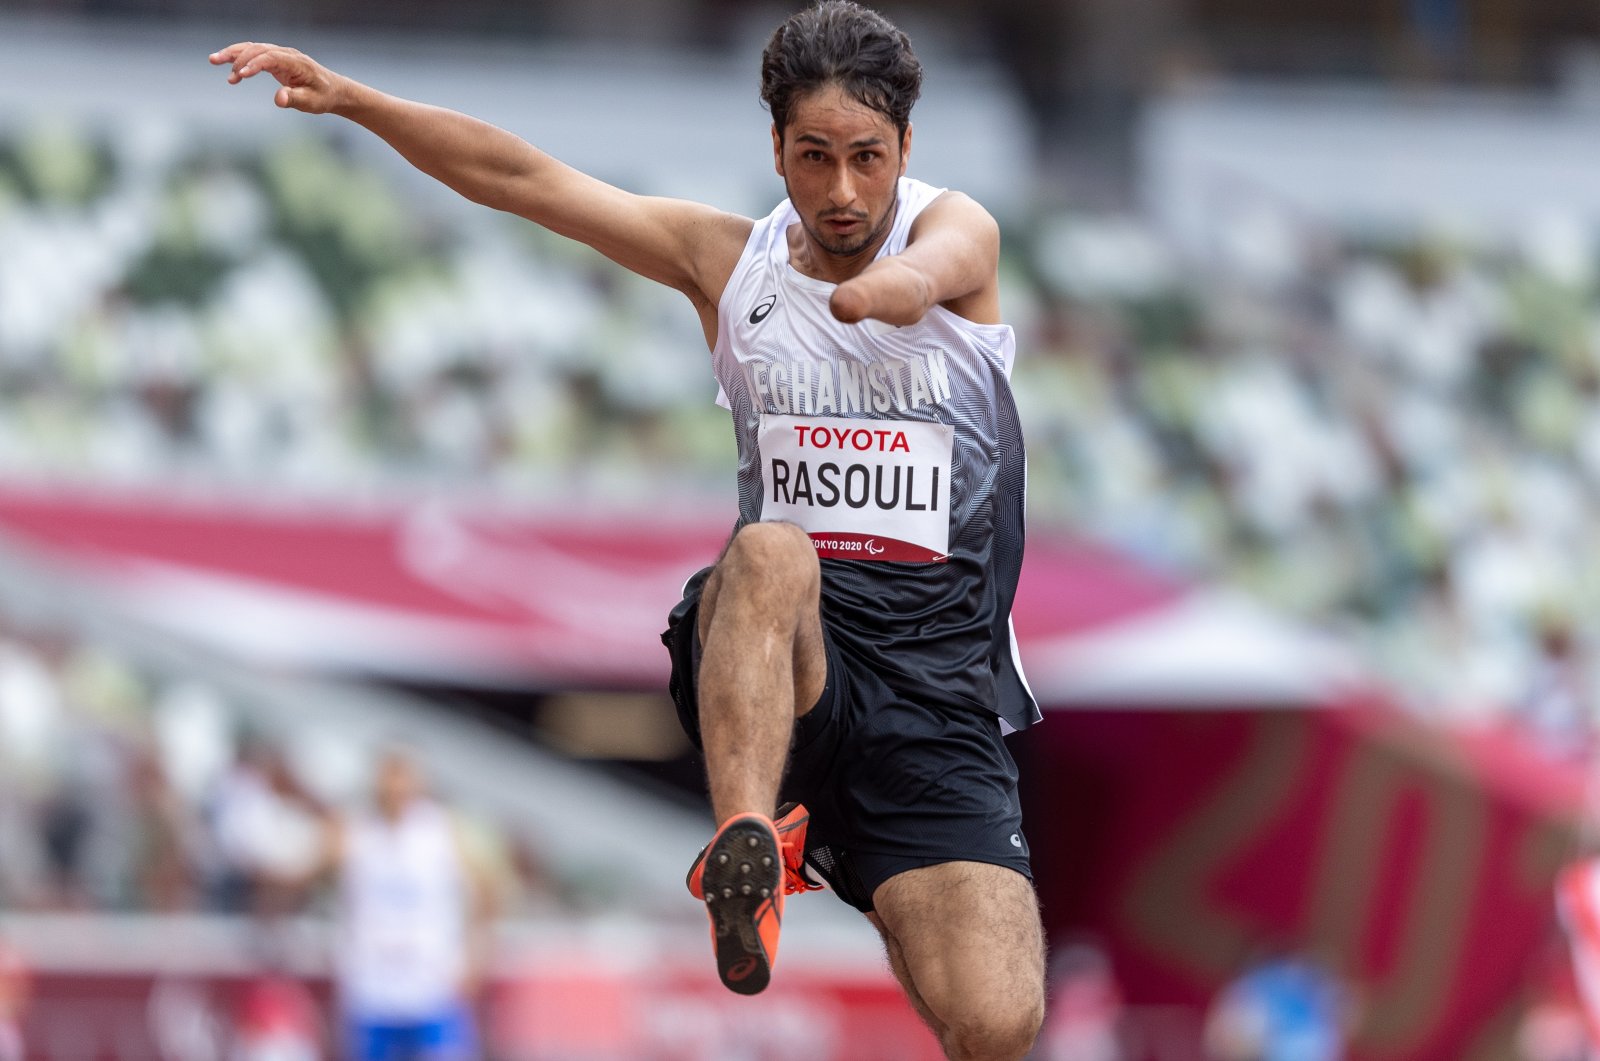 Afghanistan's Hossain Rasouli competes in Tokyo 2020 Paralympic Games men’s long jump T46 final at the Olympic Stadium, Tokyo, Japan, Aug. 31, 2021. (EPA Photo)